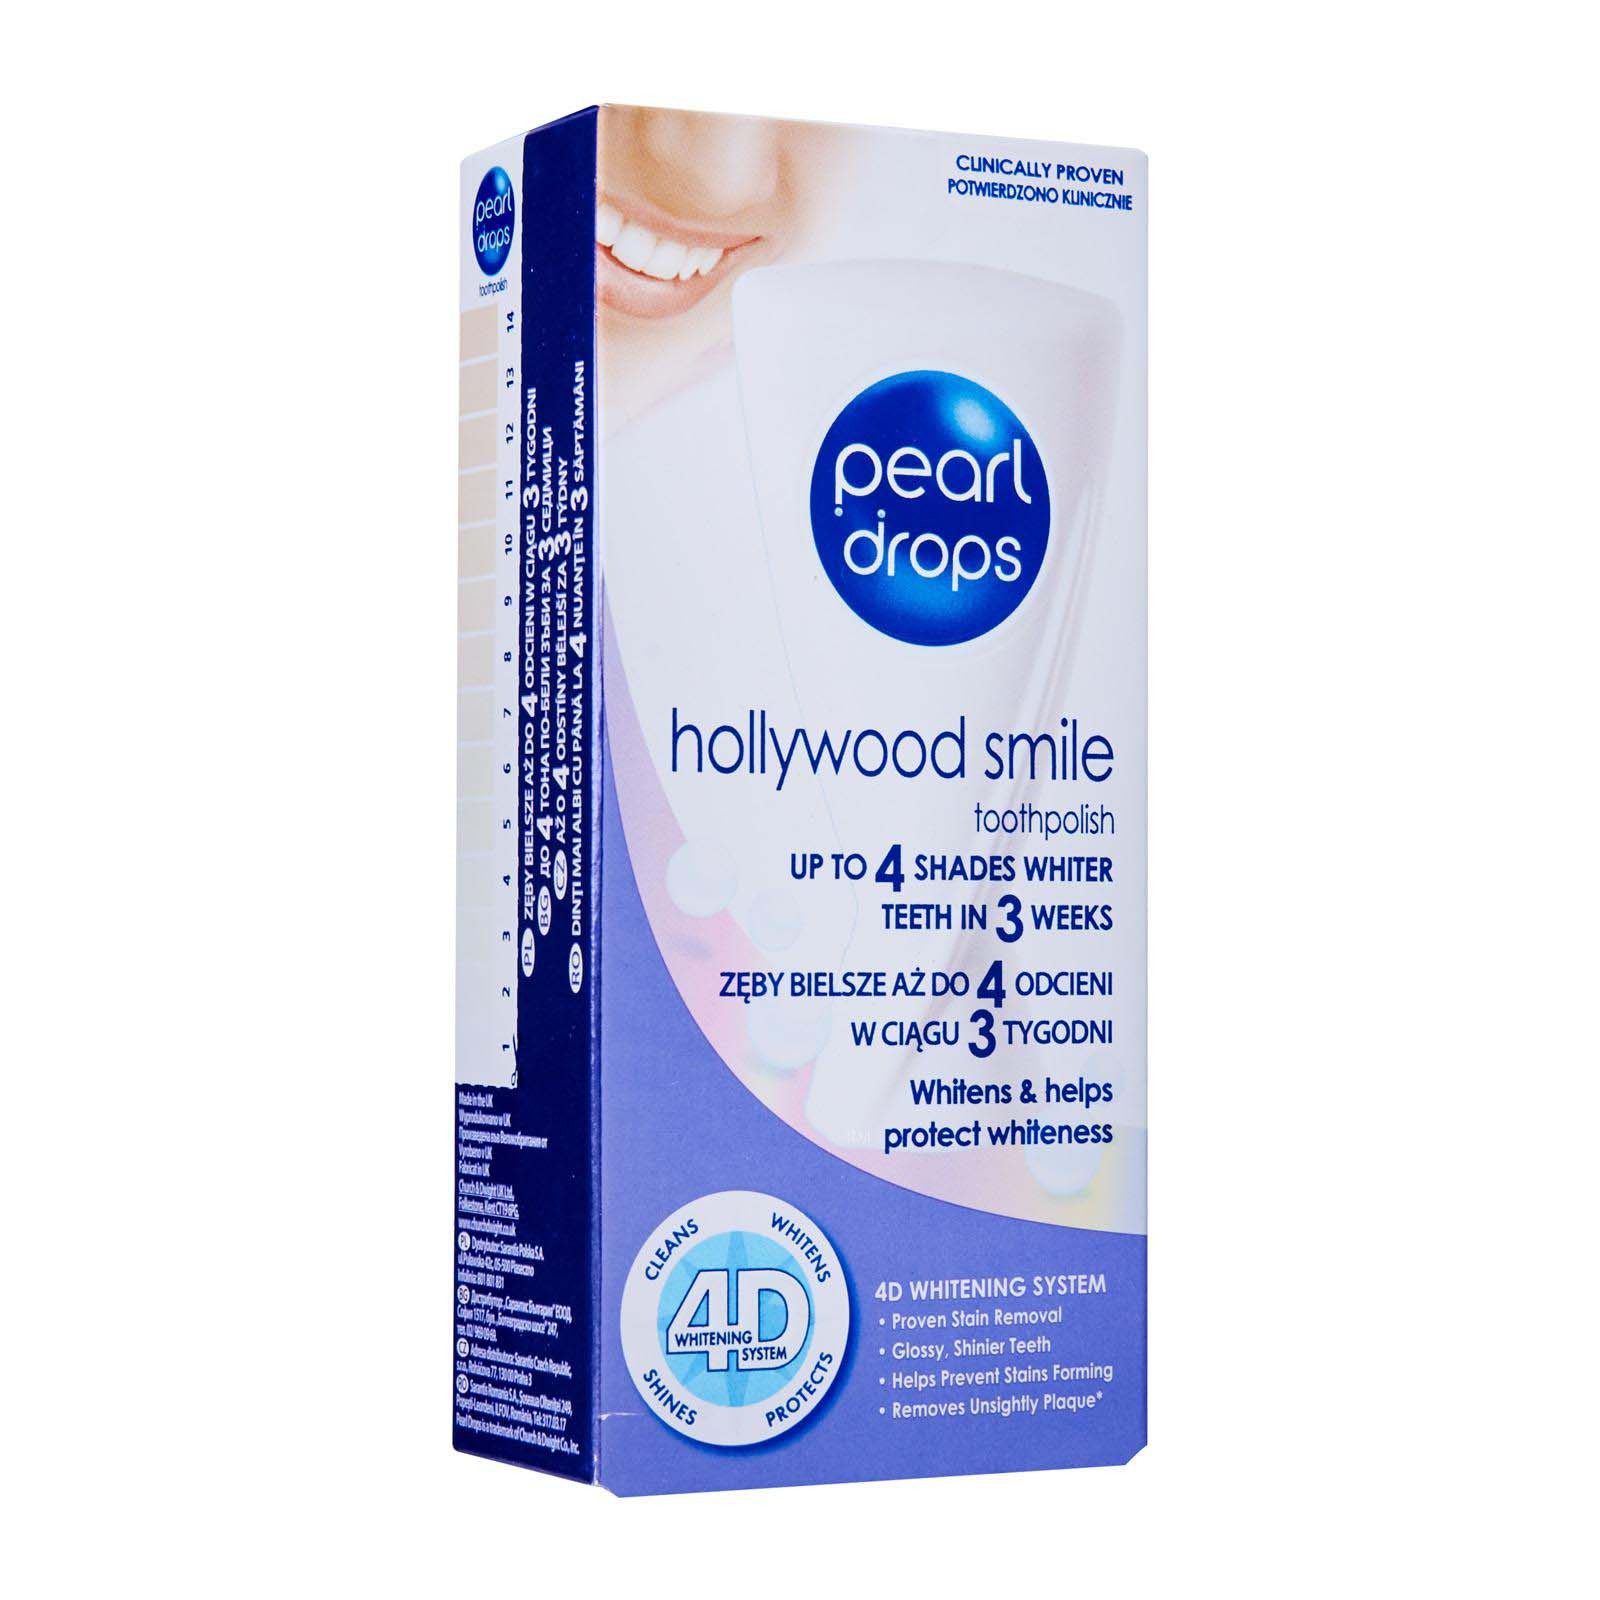 Dentifrice blanchissant de Pearl Drops Hollywood Smile 50ml